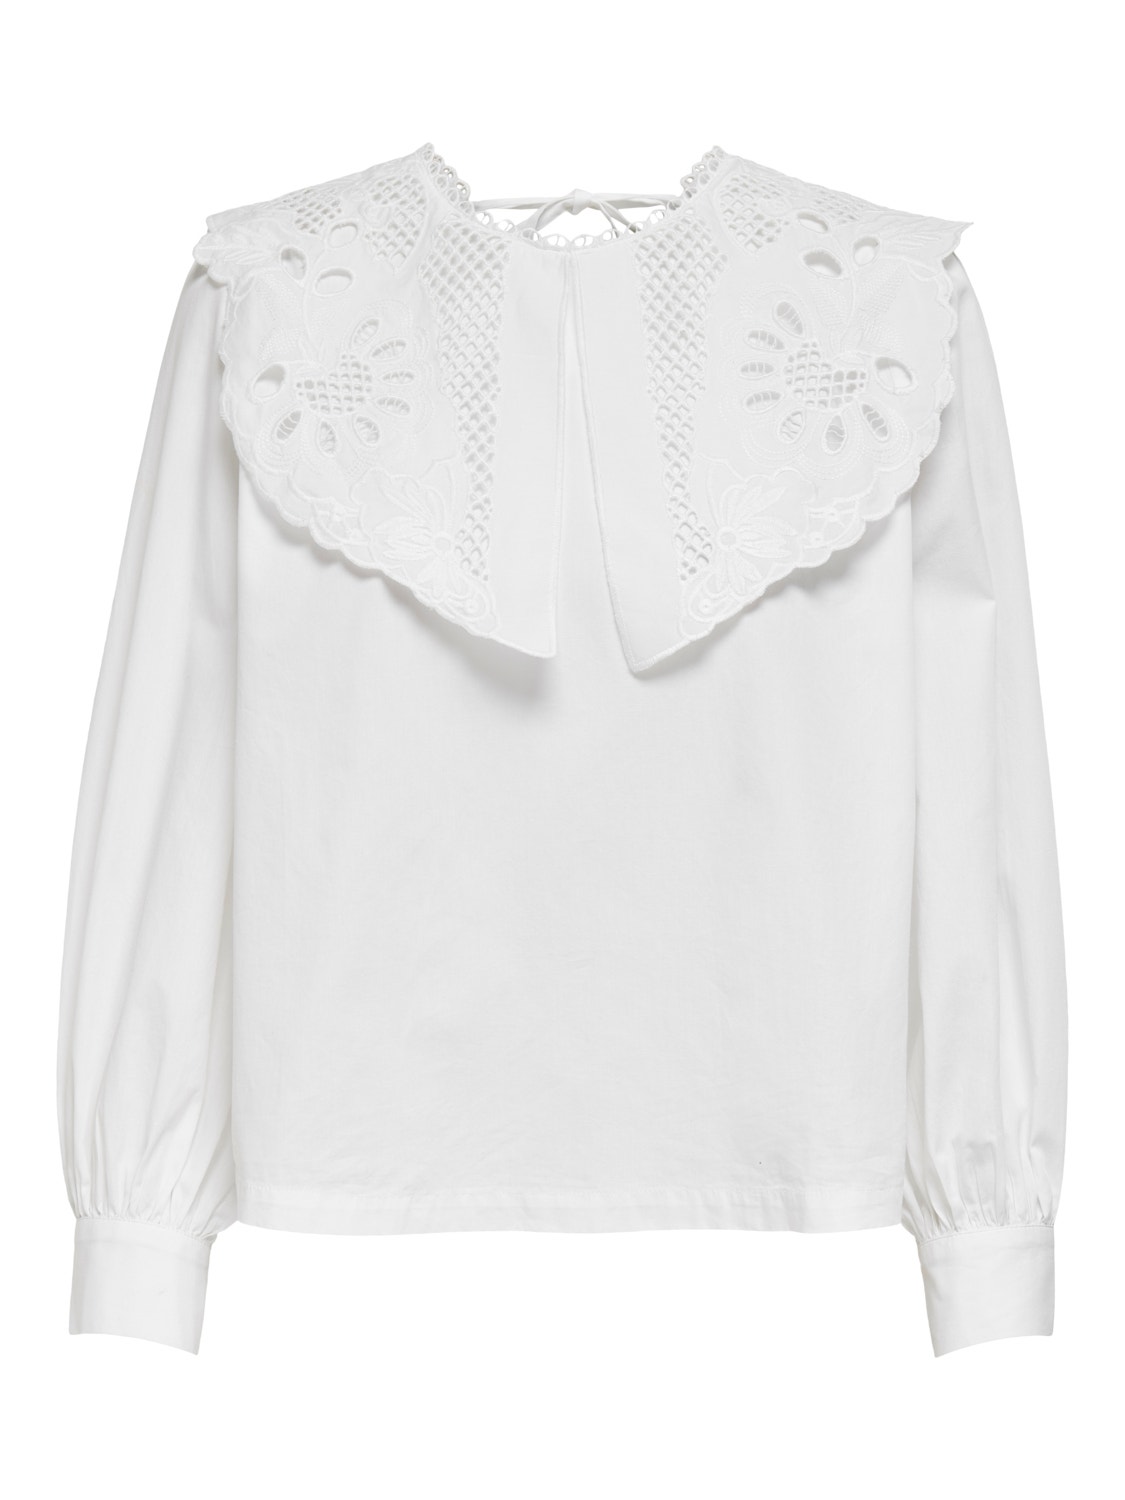 ONLY Finitions Top -White - 15233634